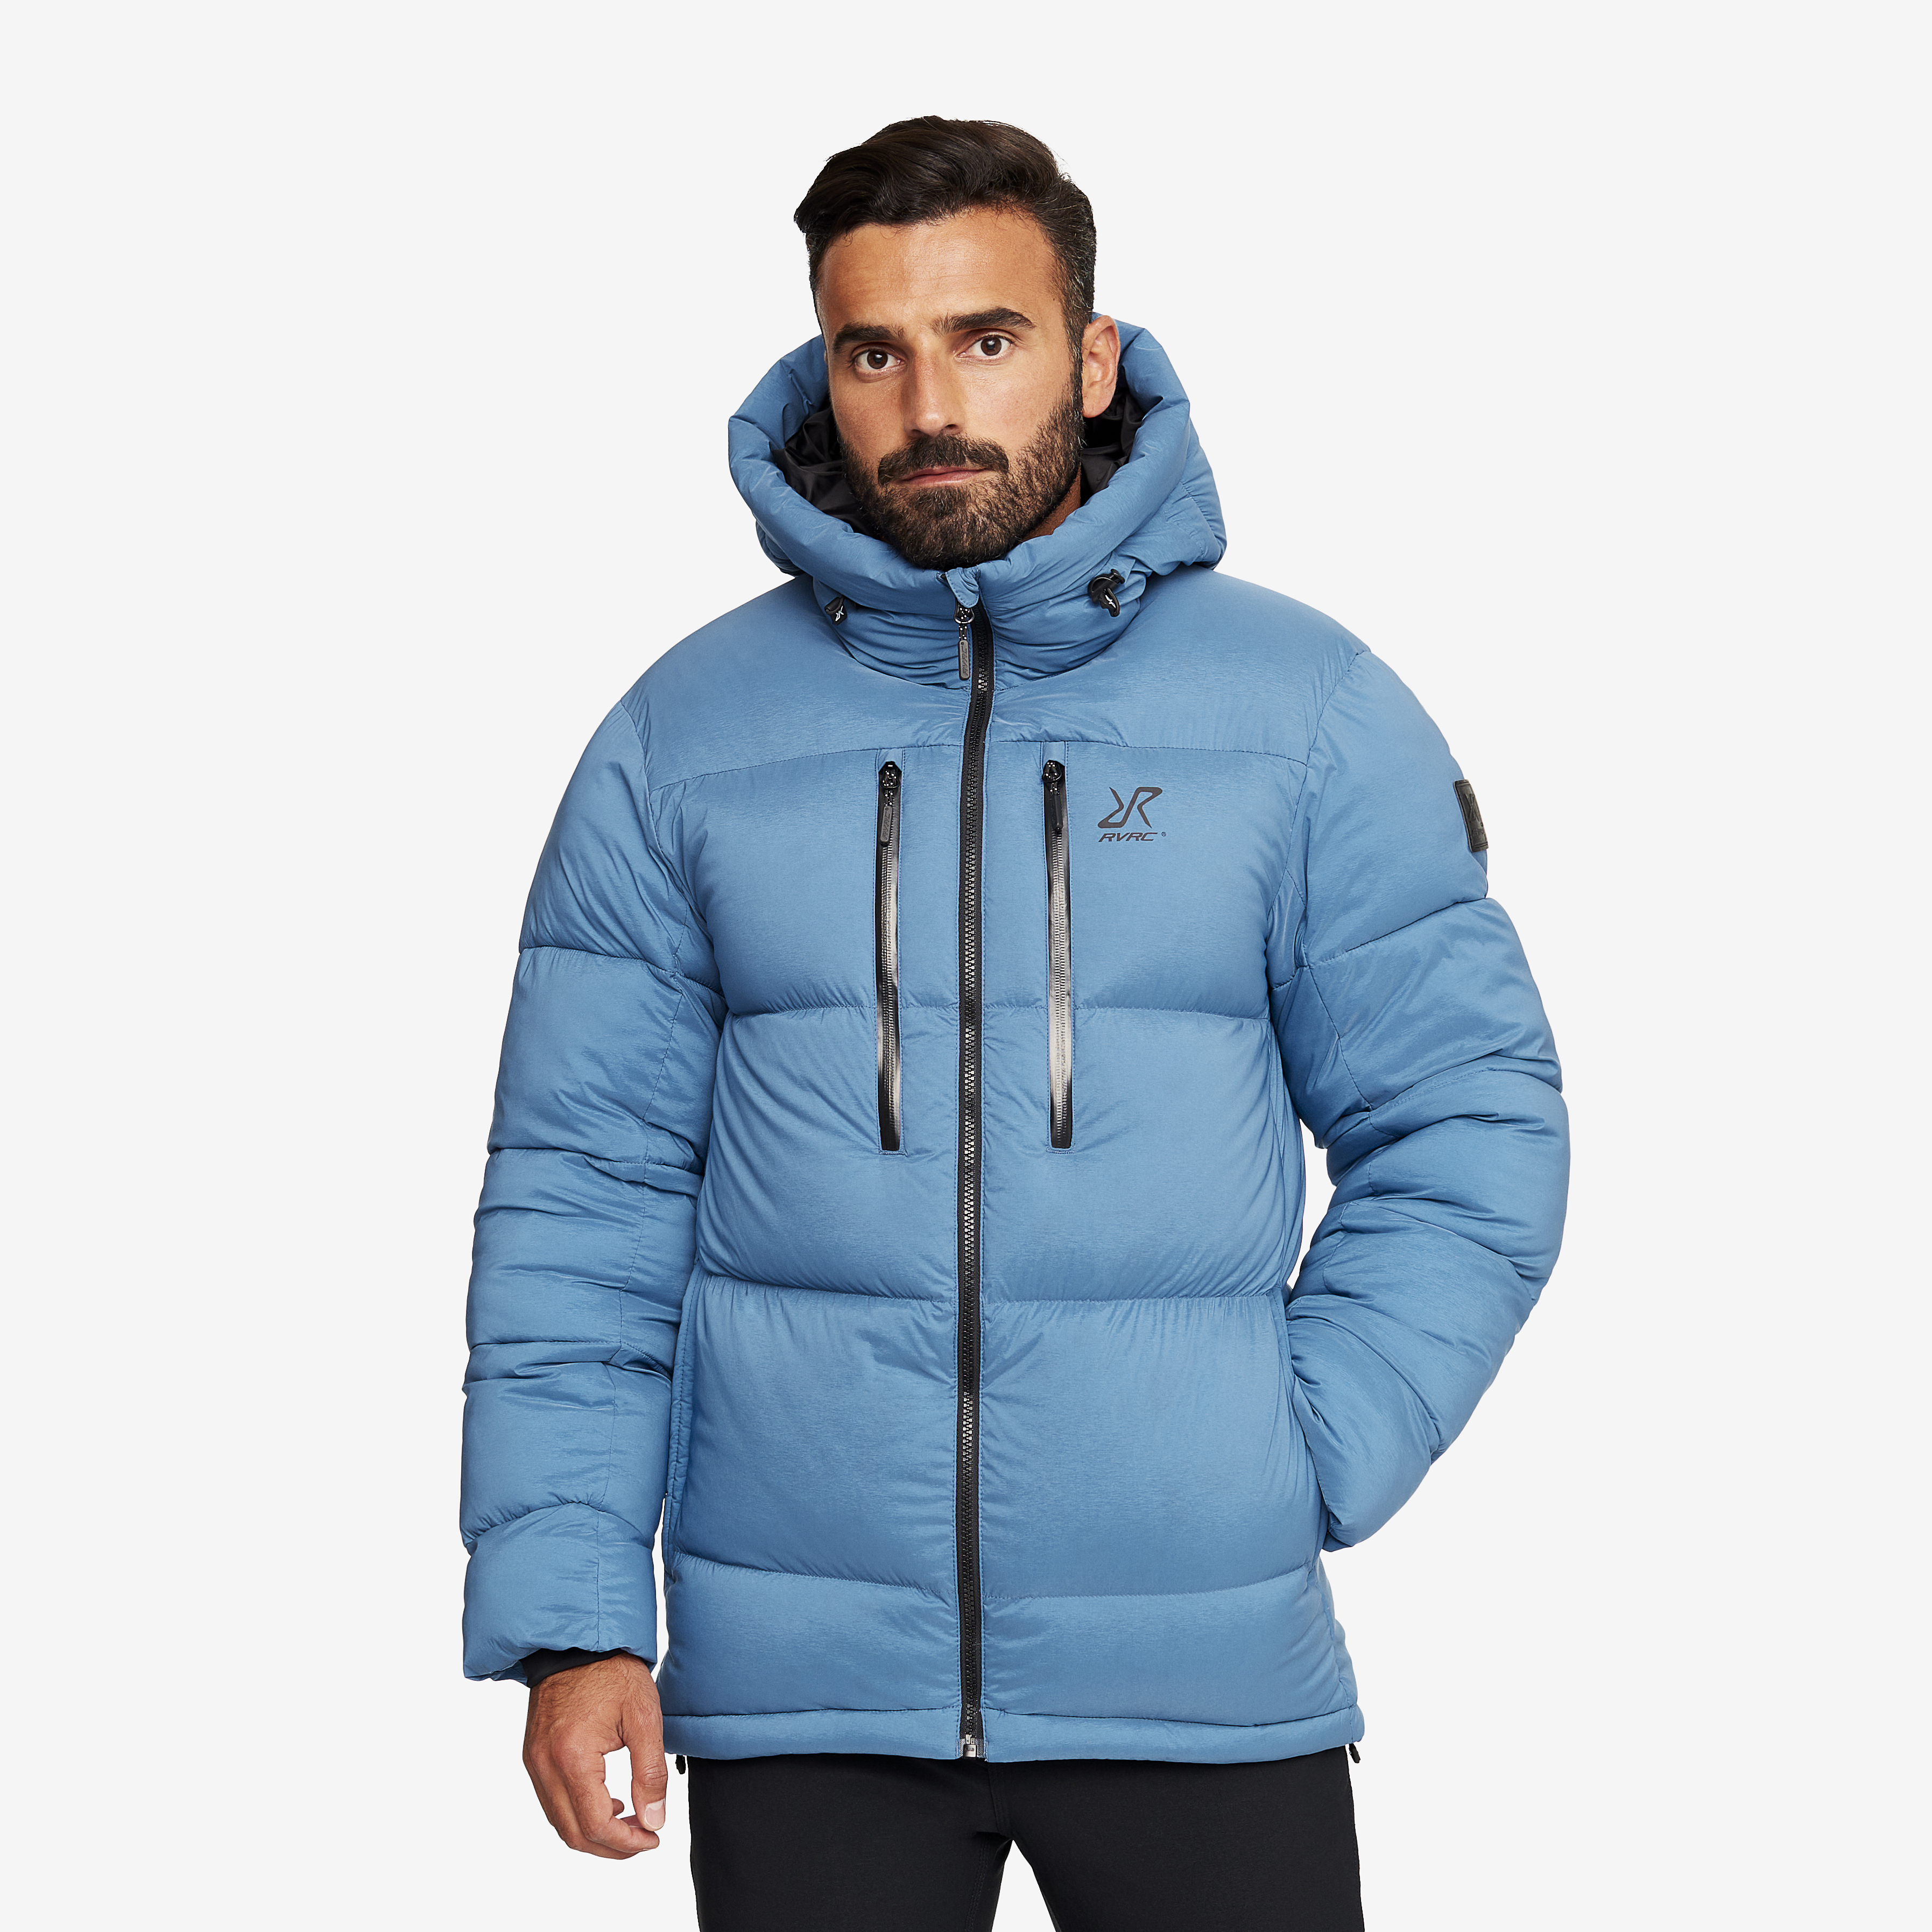 Flexpedition Jacket Pacific Blue Herr